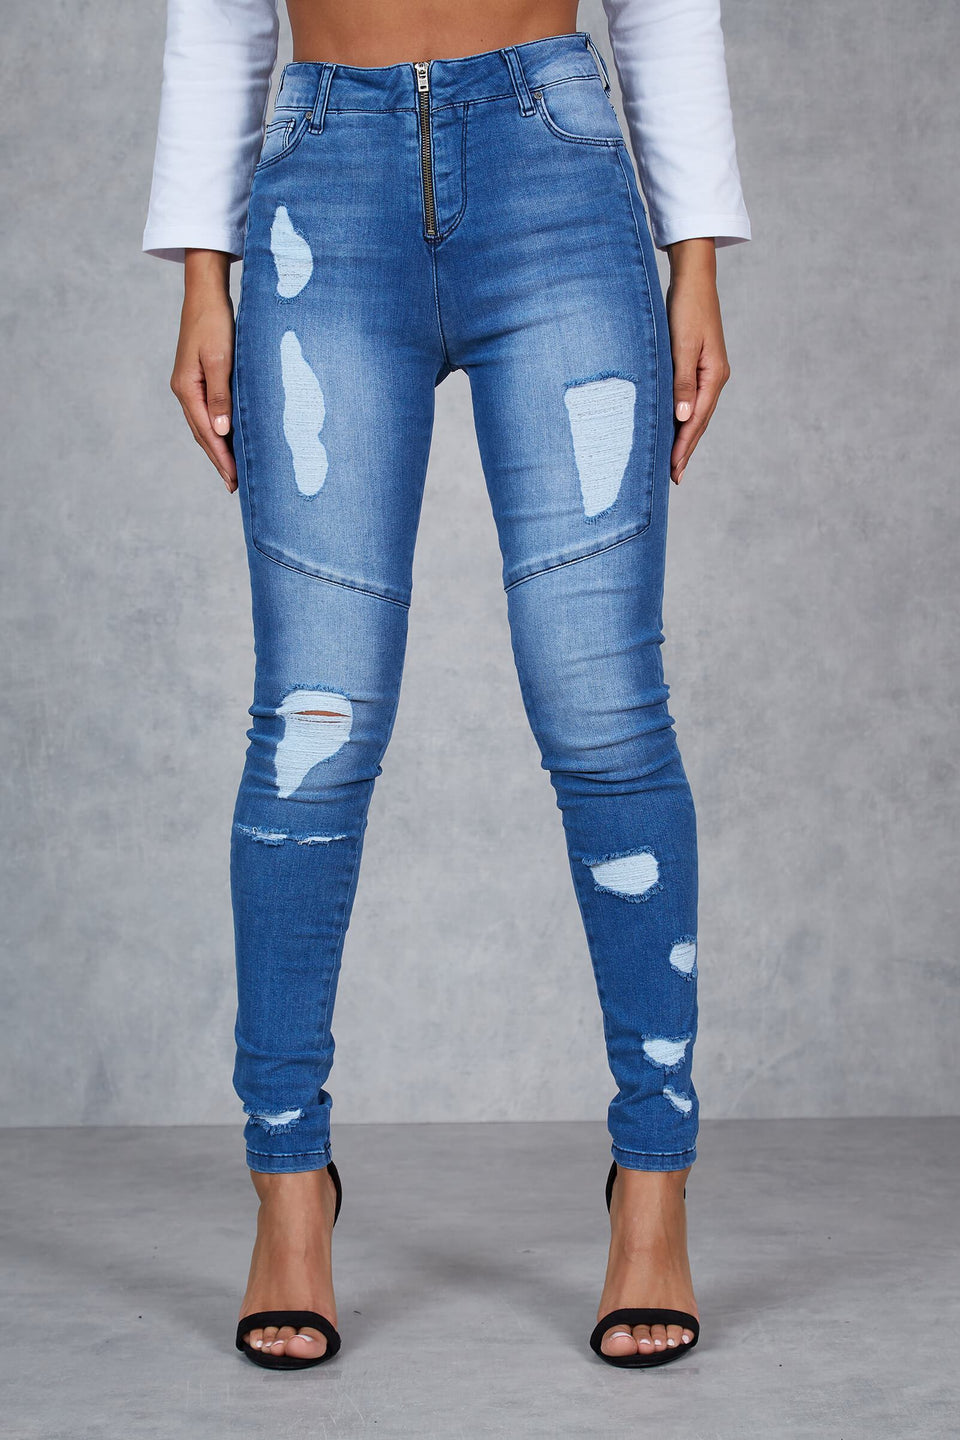 Bay Washed Skinny Jeans - Mid Blue Wash